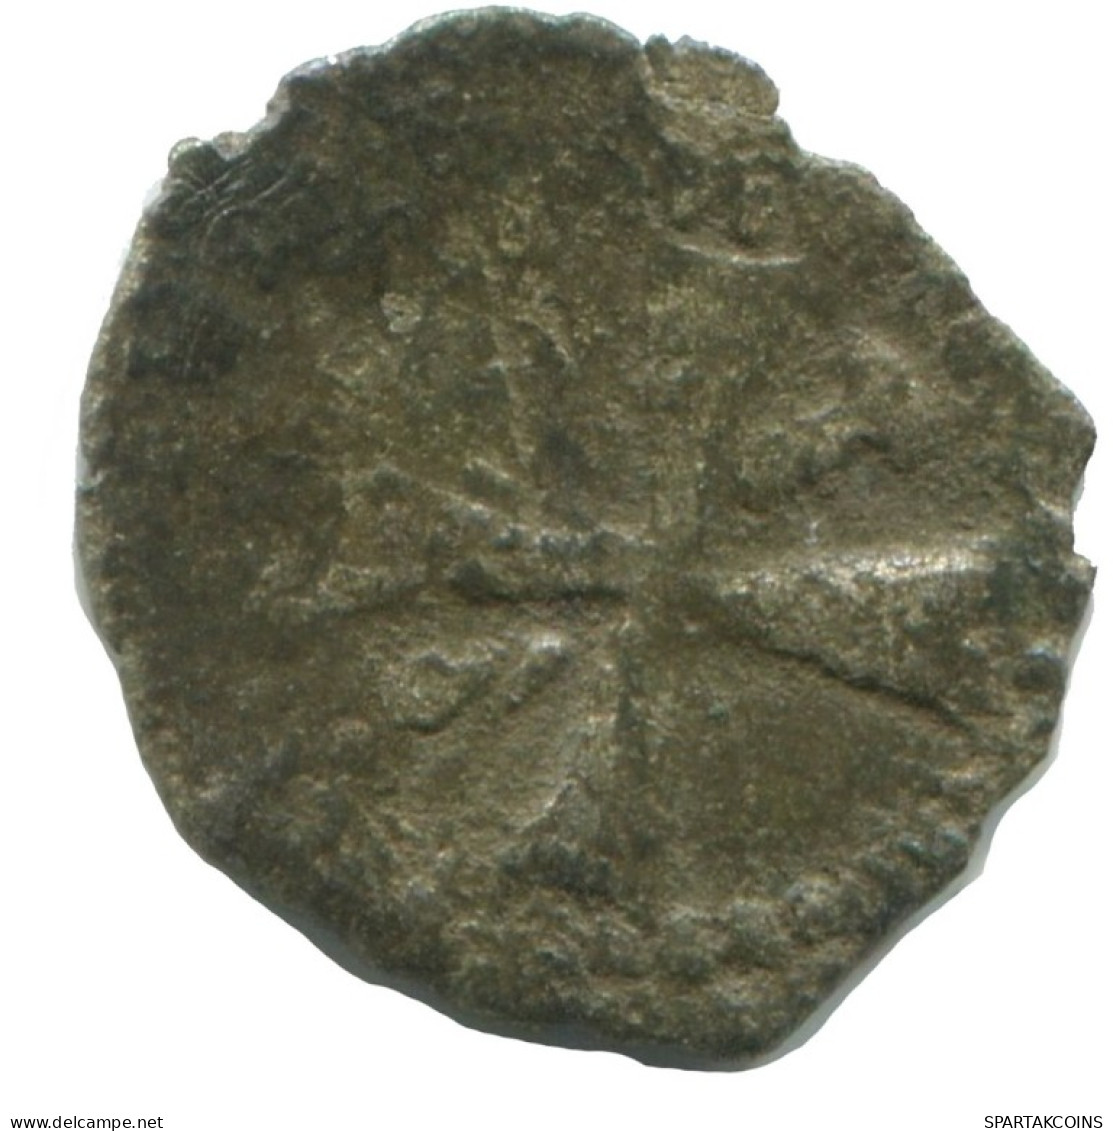 CRUSADER CROSS Authentic Original MEDIEVAL EUROPEAN Coin 0.4g/14mm #AC411.8.D.A - Other - Europe